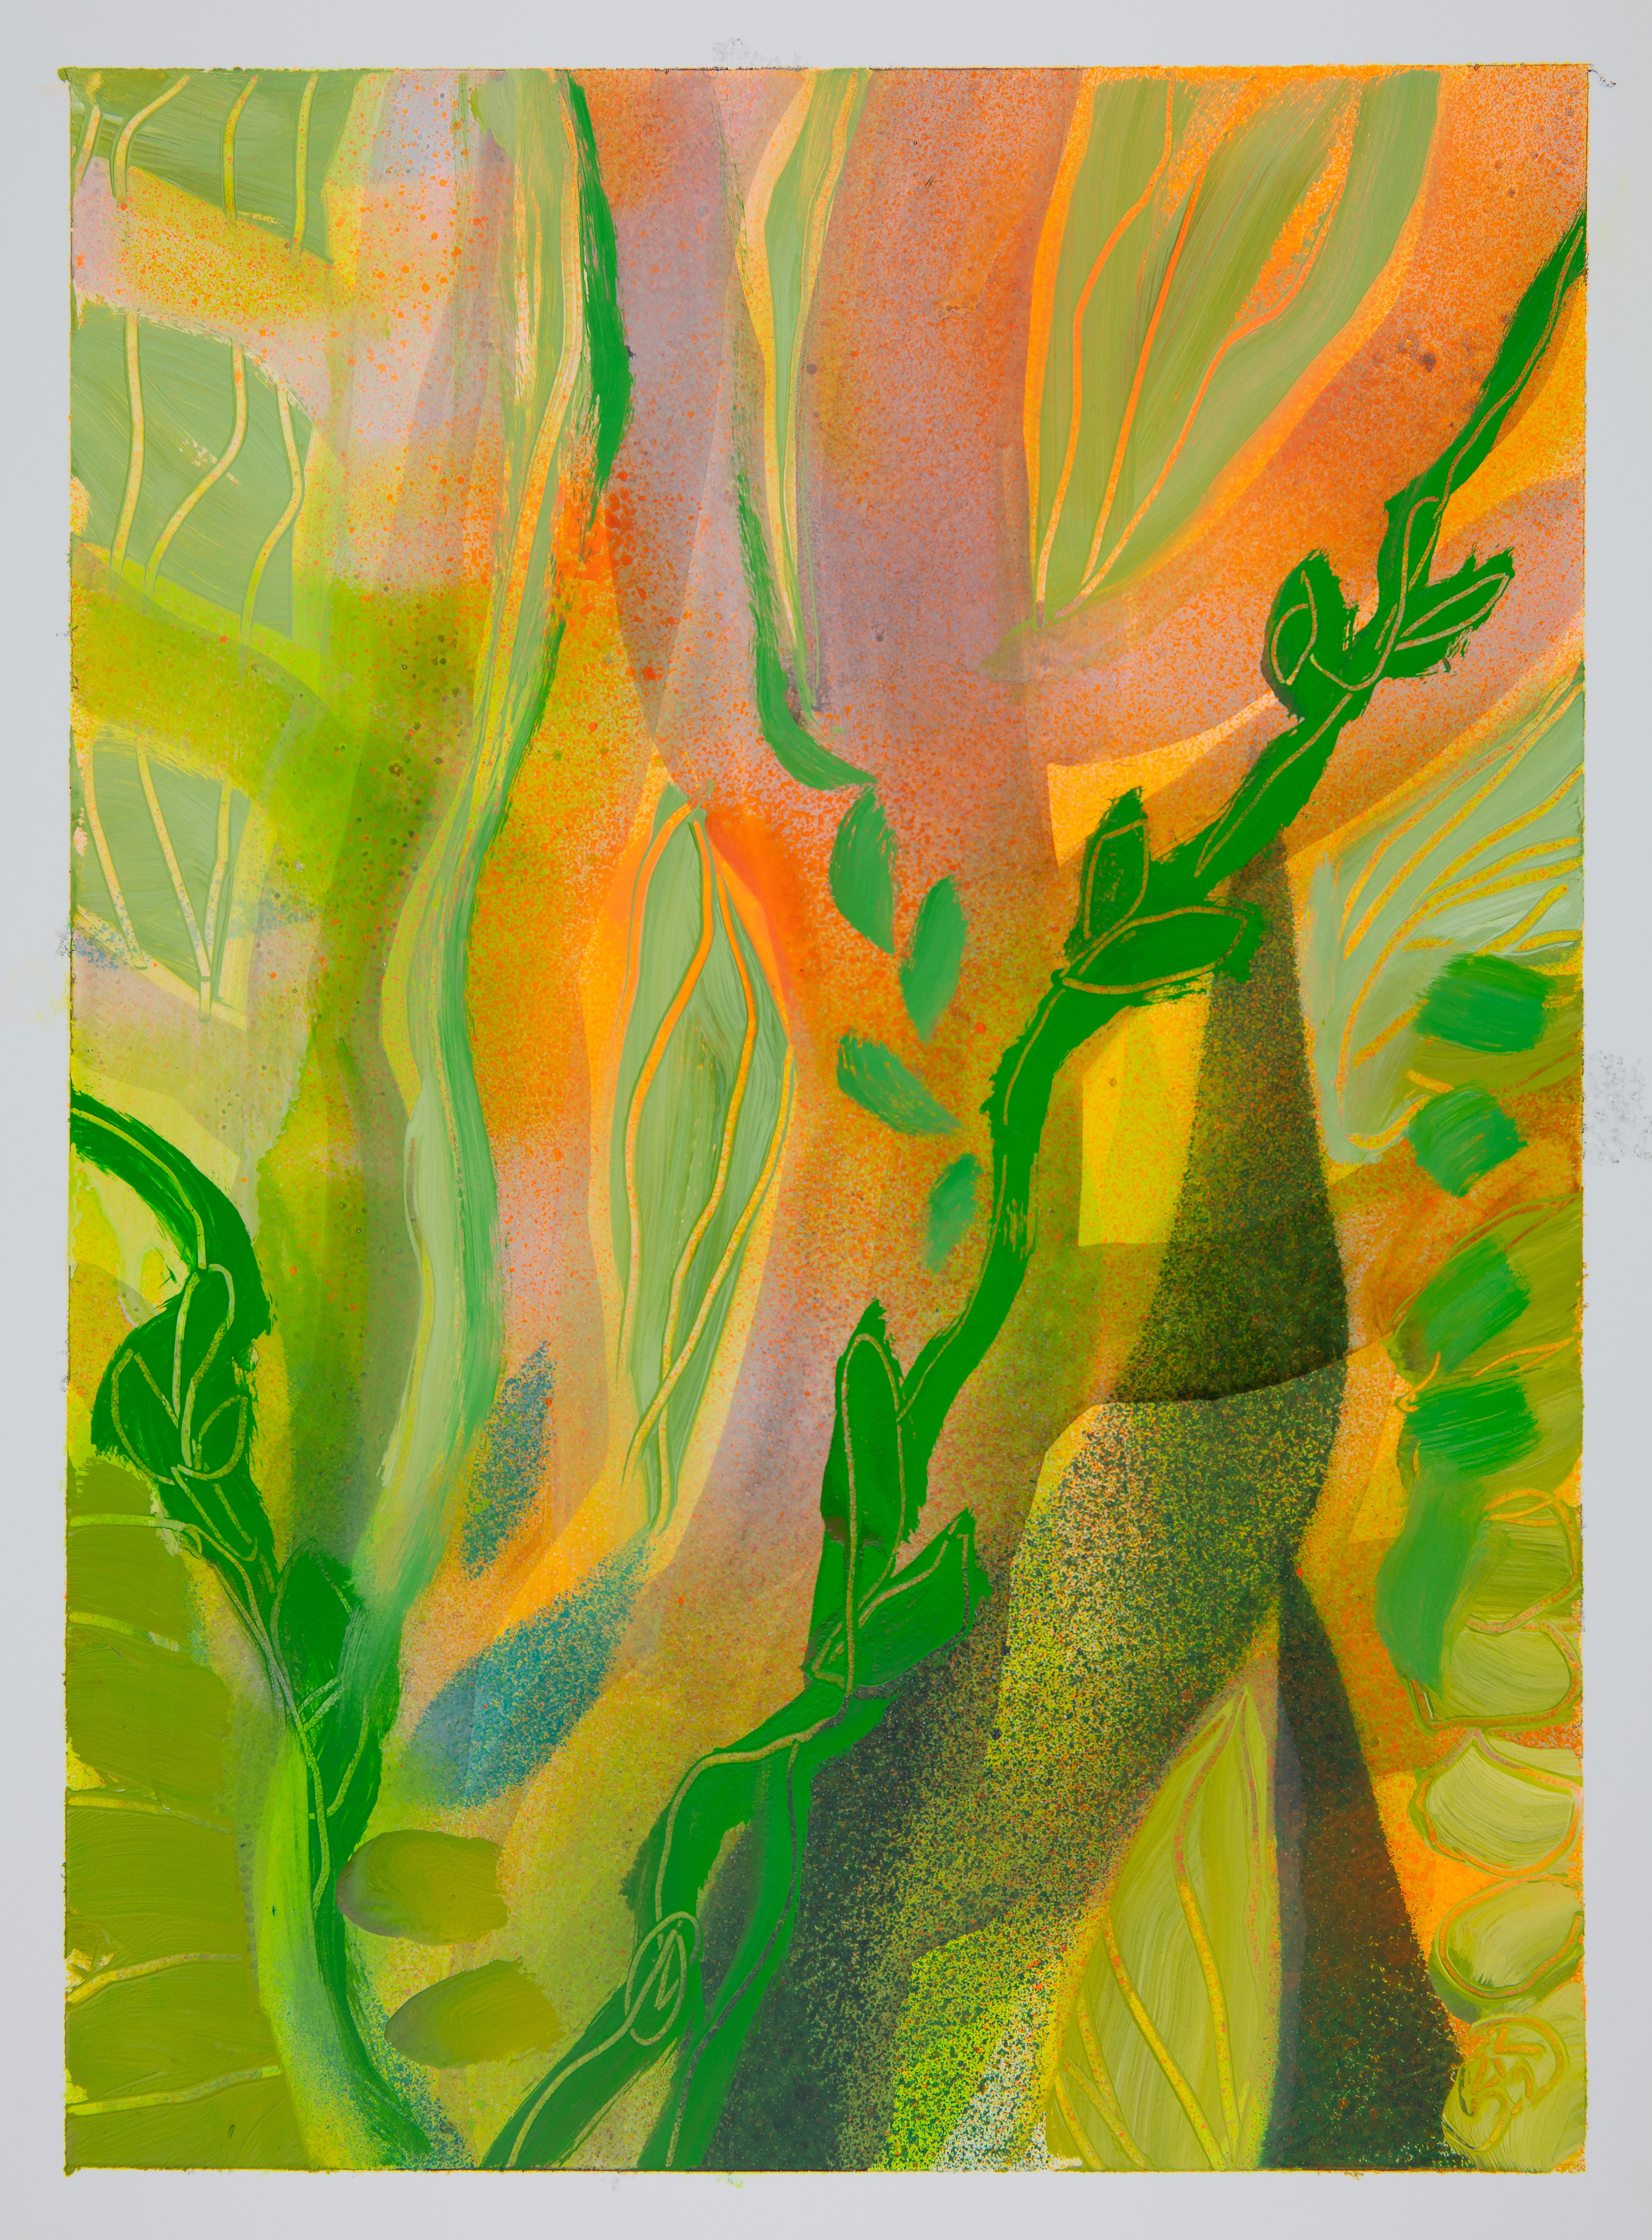 Botanical V, bright green and orange abstract plants, surreal scene